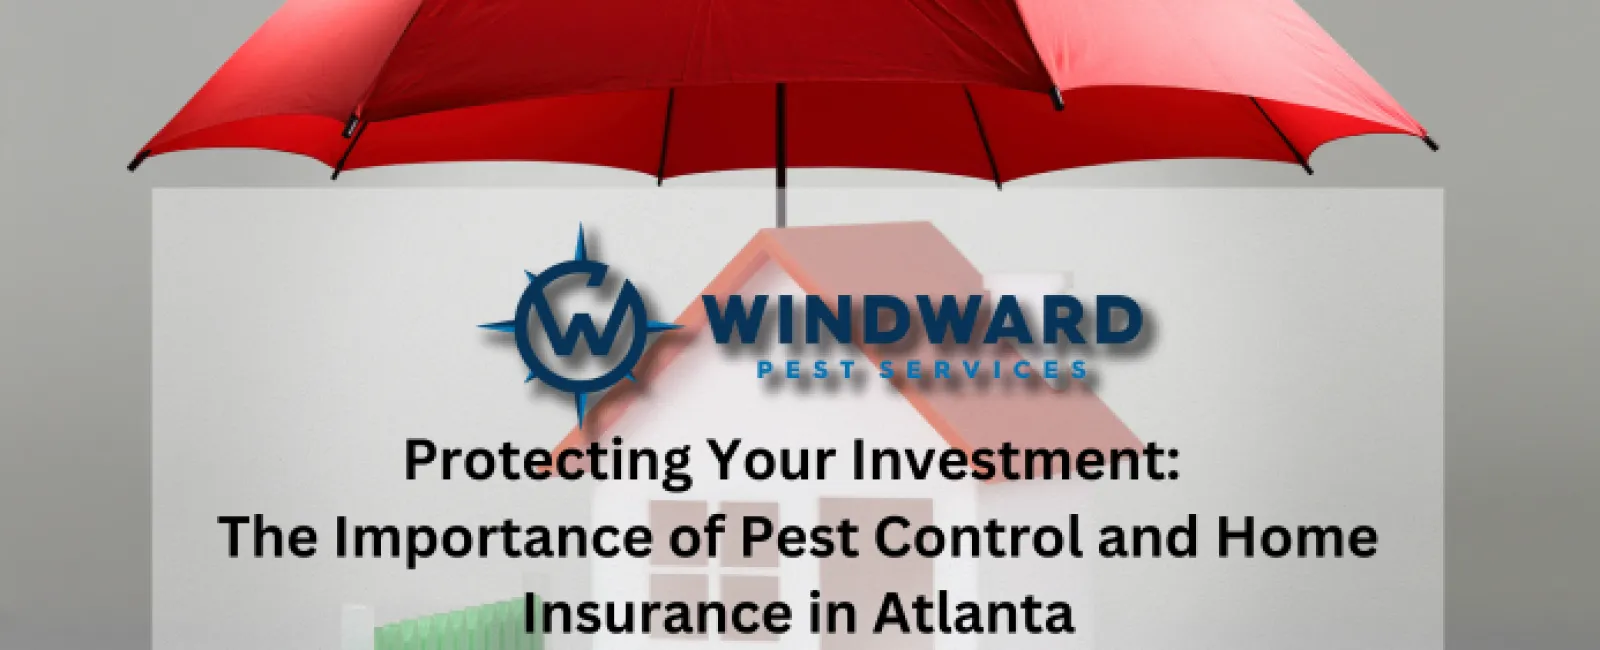 Protecting Your Investment: The Importance of Pest Control and Home Insurance in Atlanta